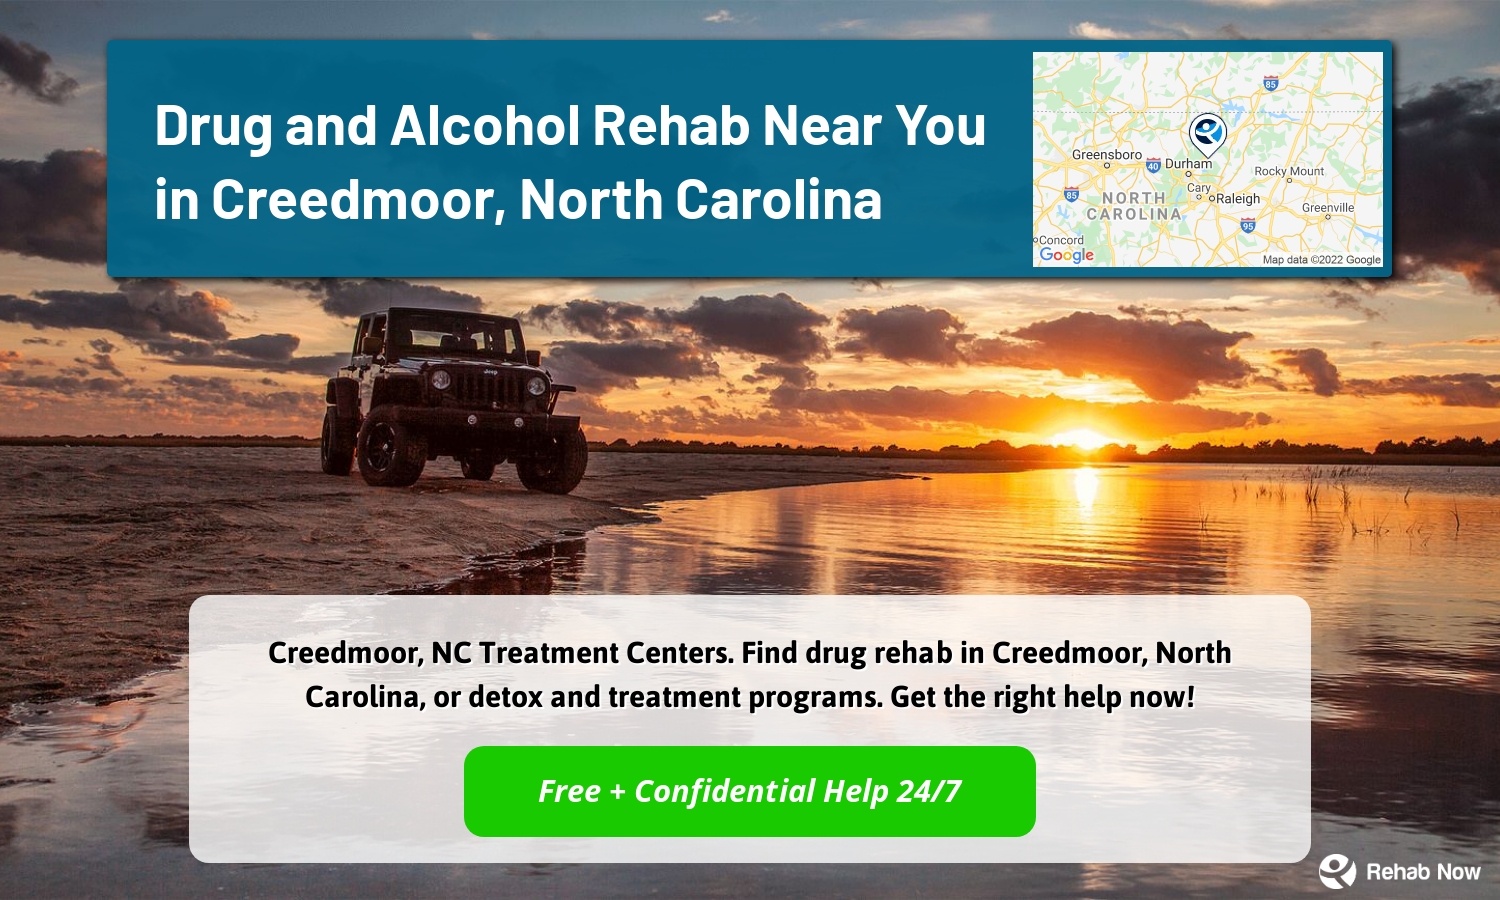 Creedmoor, NC Treatment Centers. Find drug rehab in Creedmoor, North Carolina, or detox and treatment programs. Get the right help now!